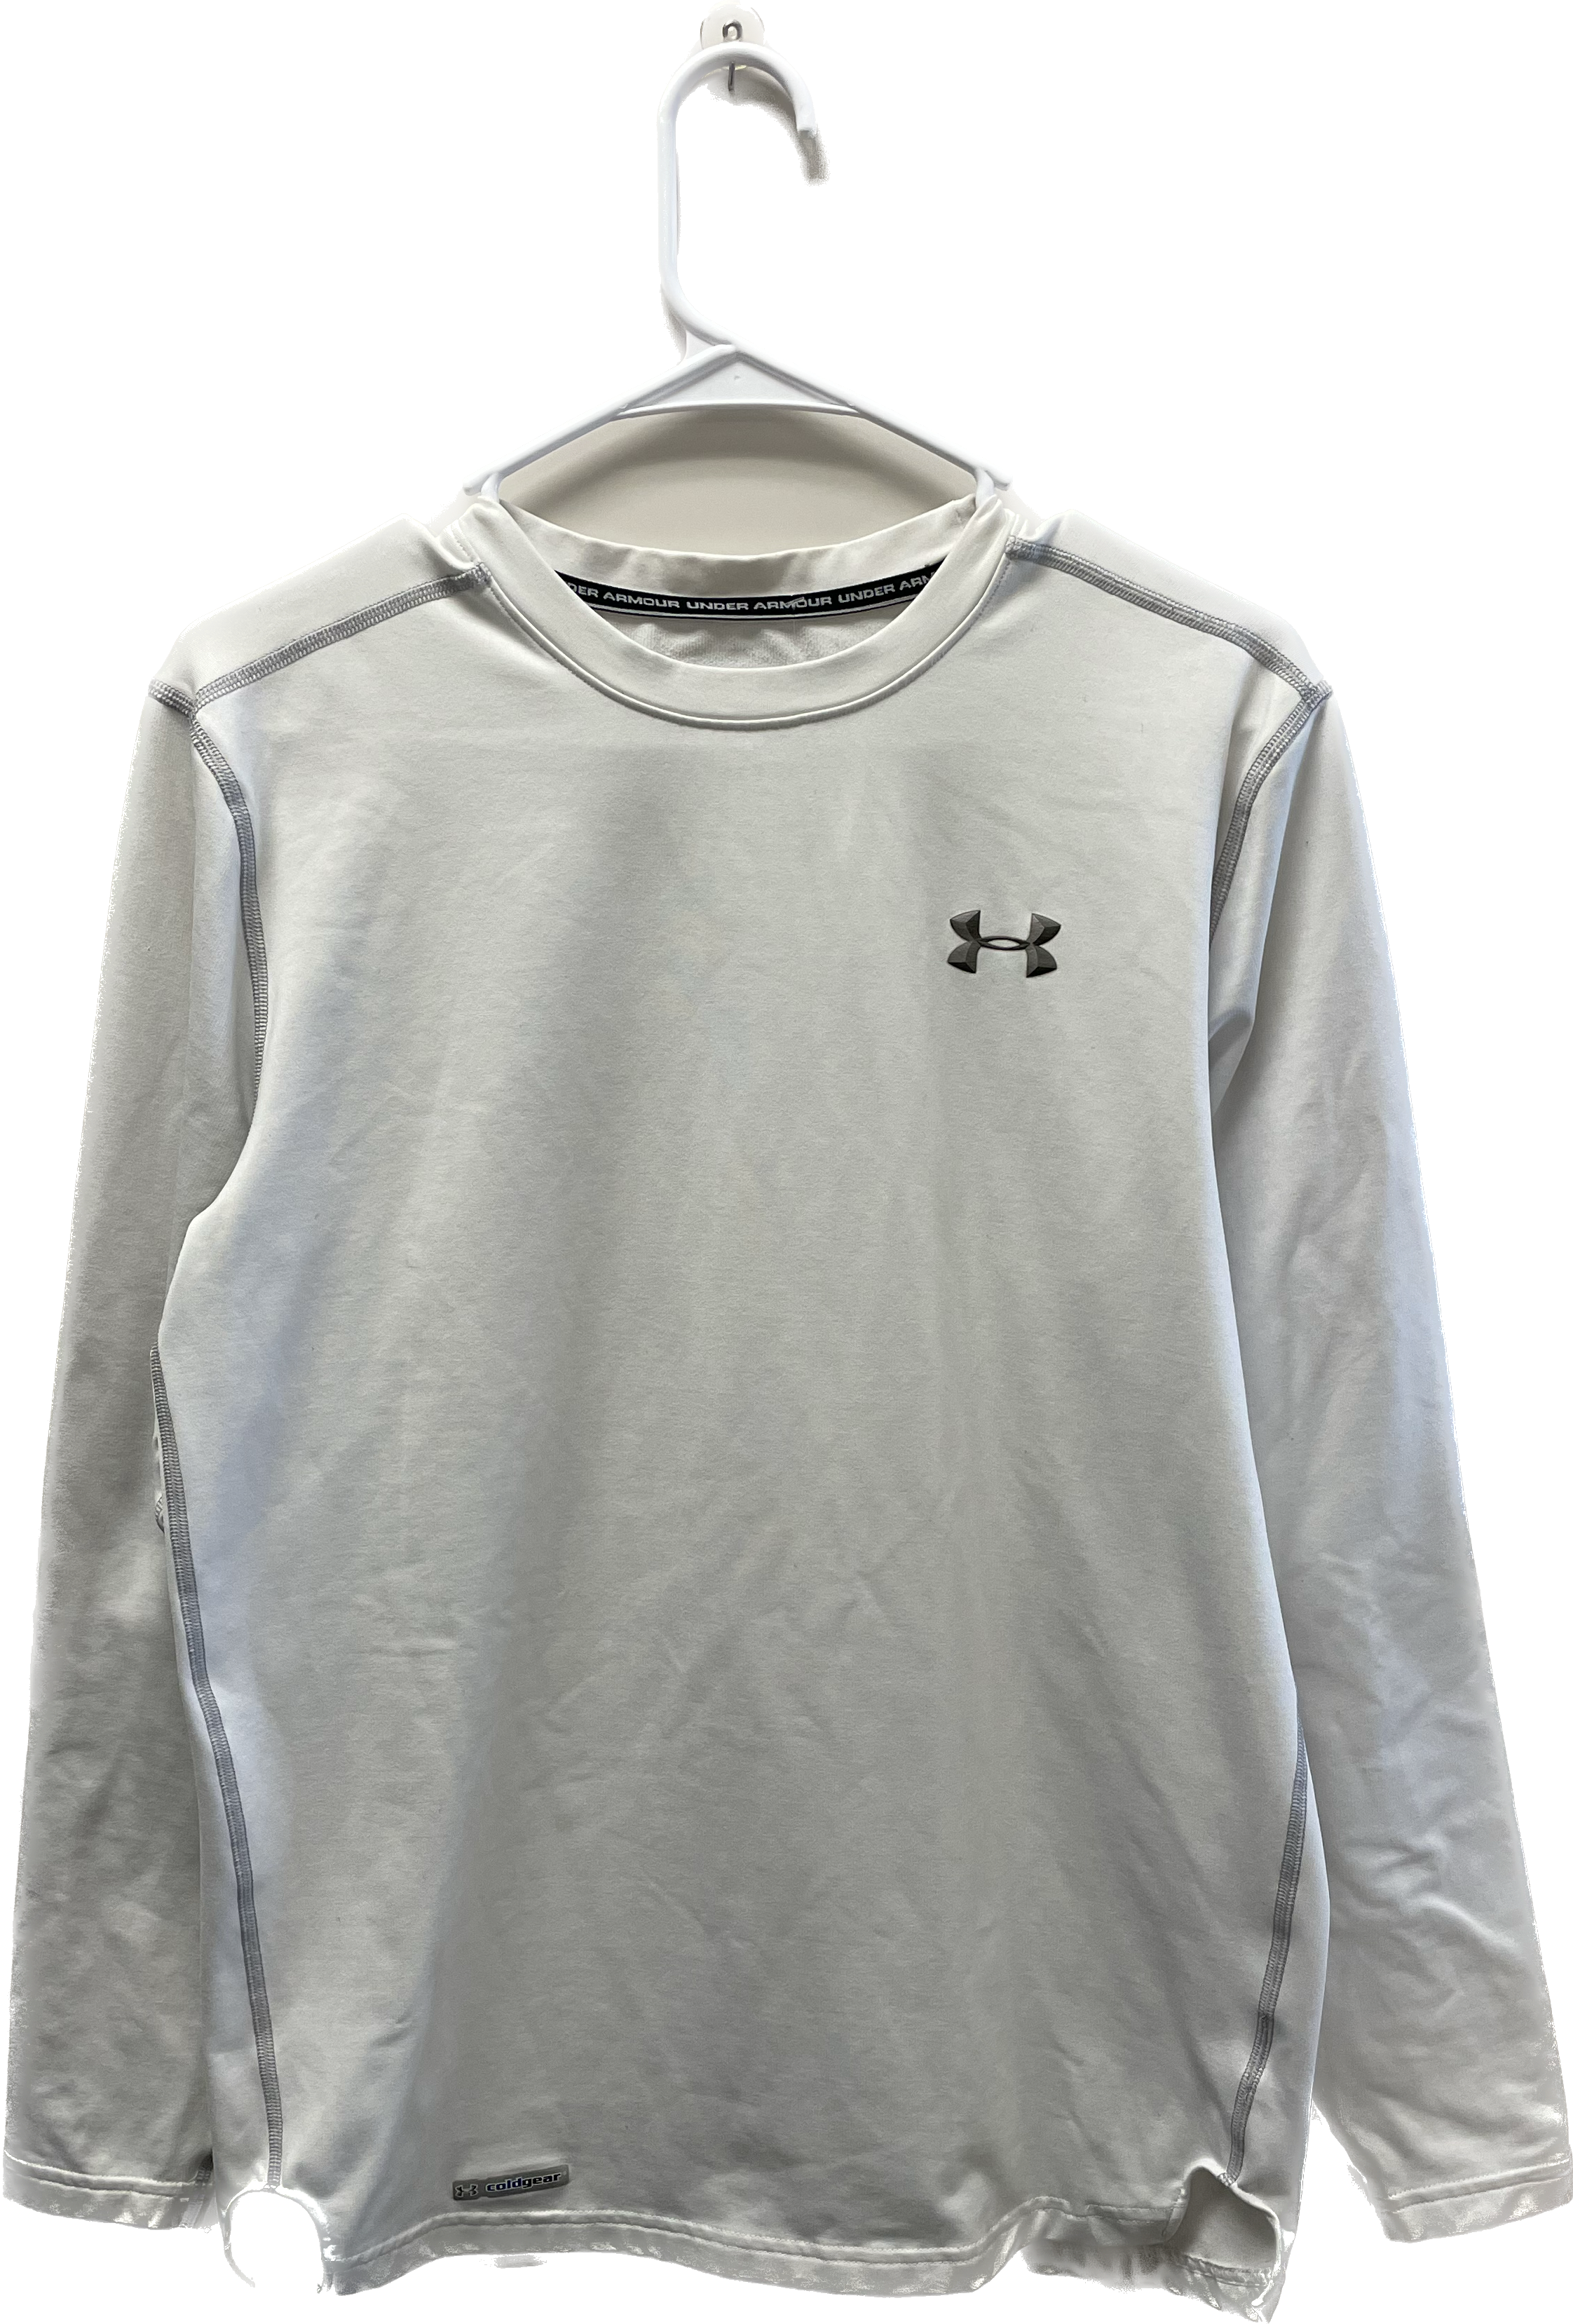 Under Armour Cold Gear Shirt, White Mens Size M